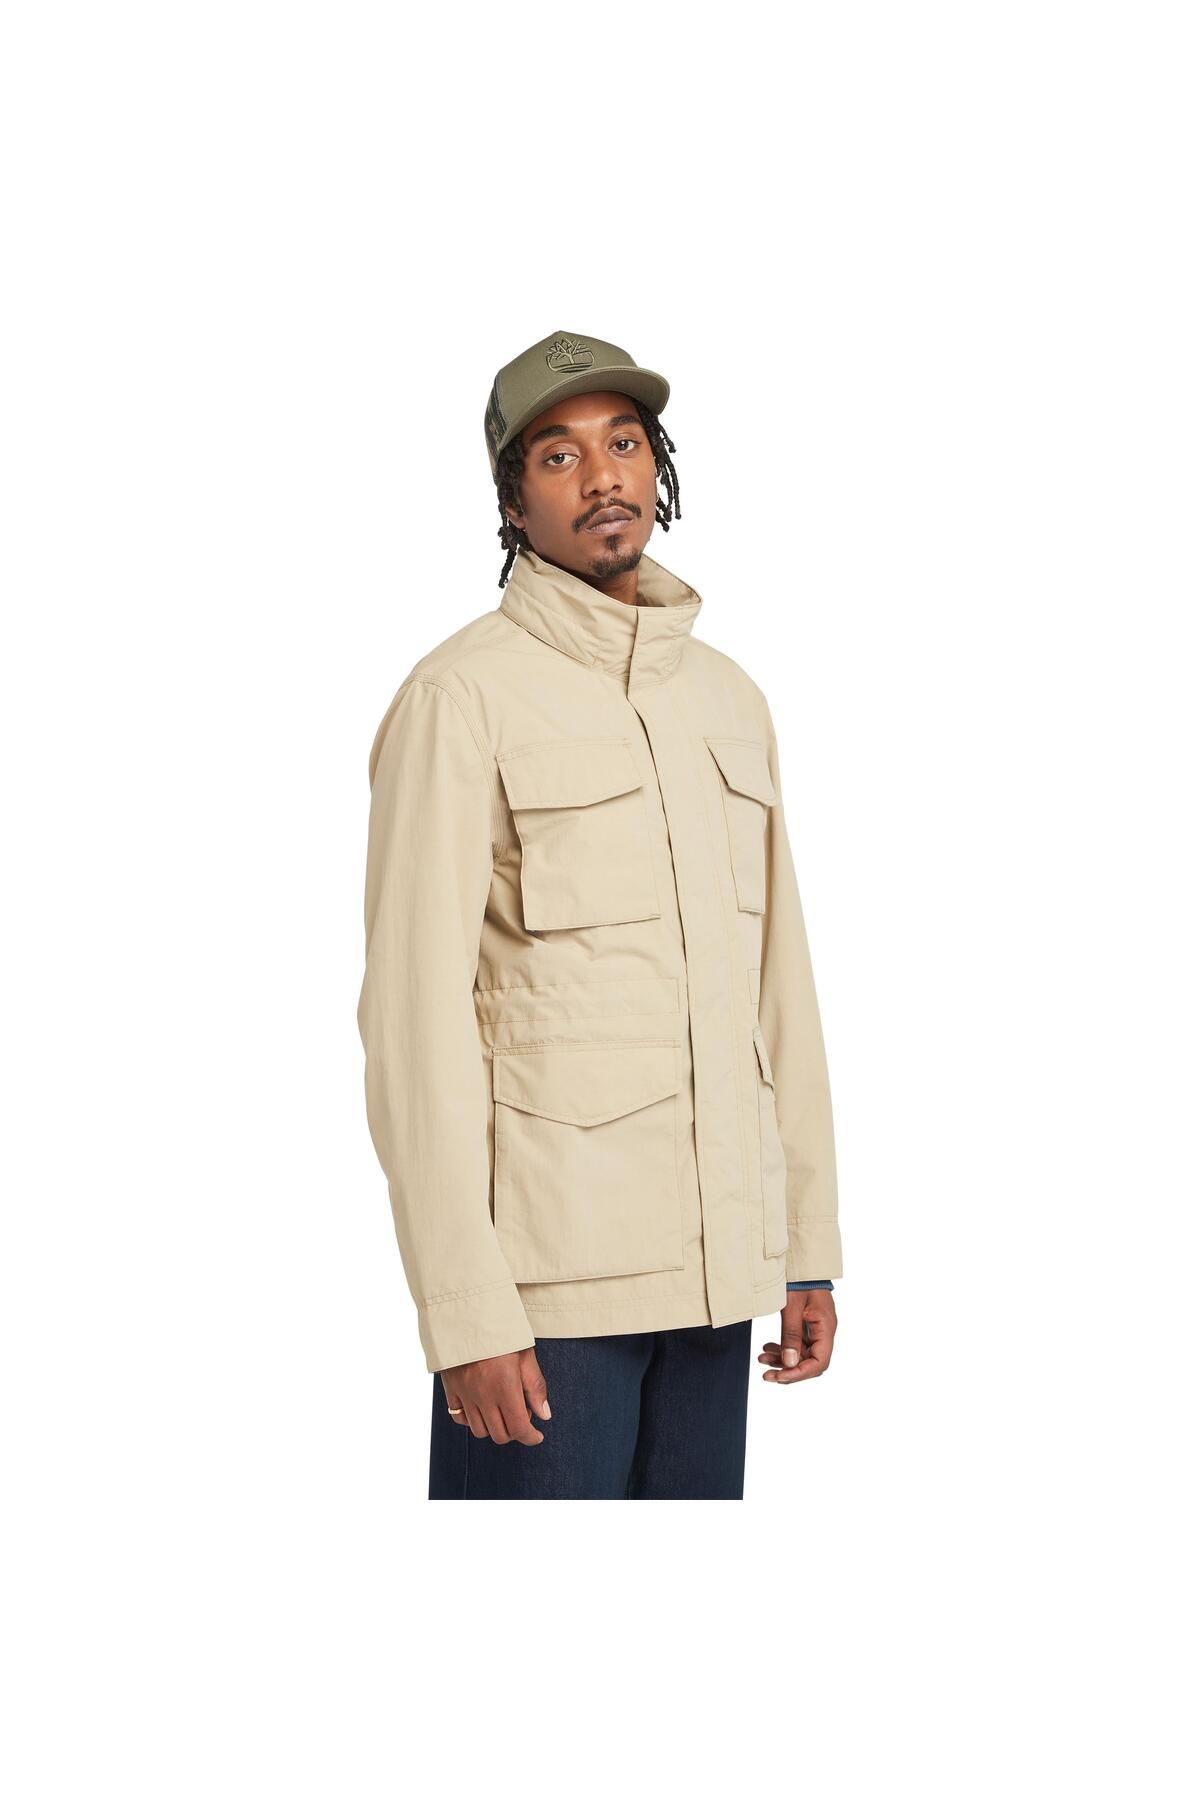 Timberland TİMBERLAND Water Resistant Field Jacket TB0A5TSUDH41